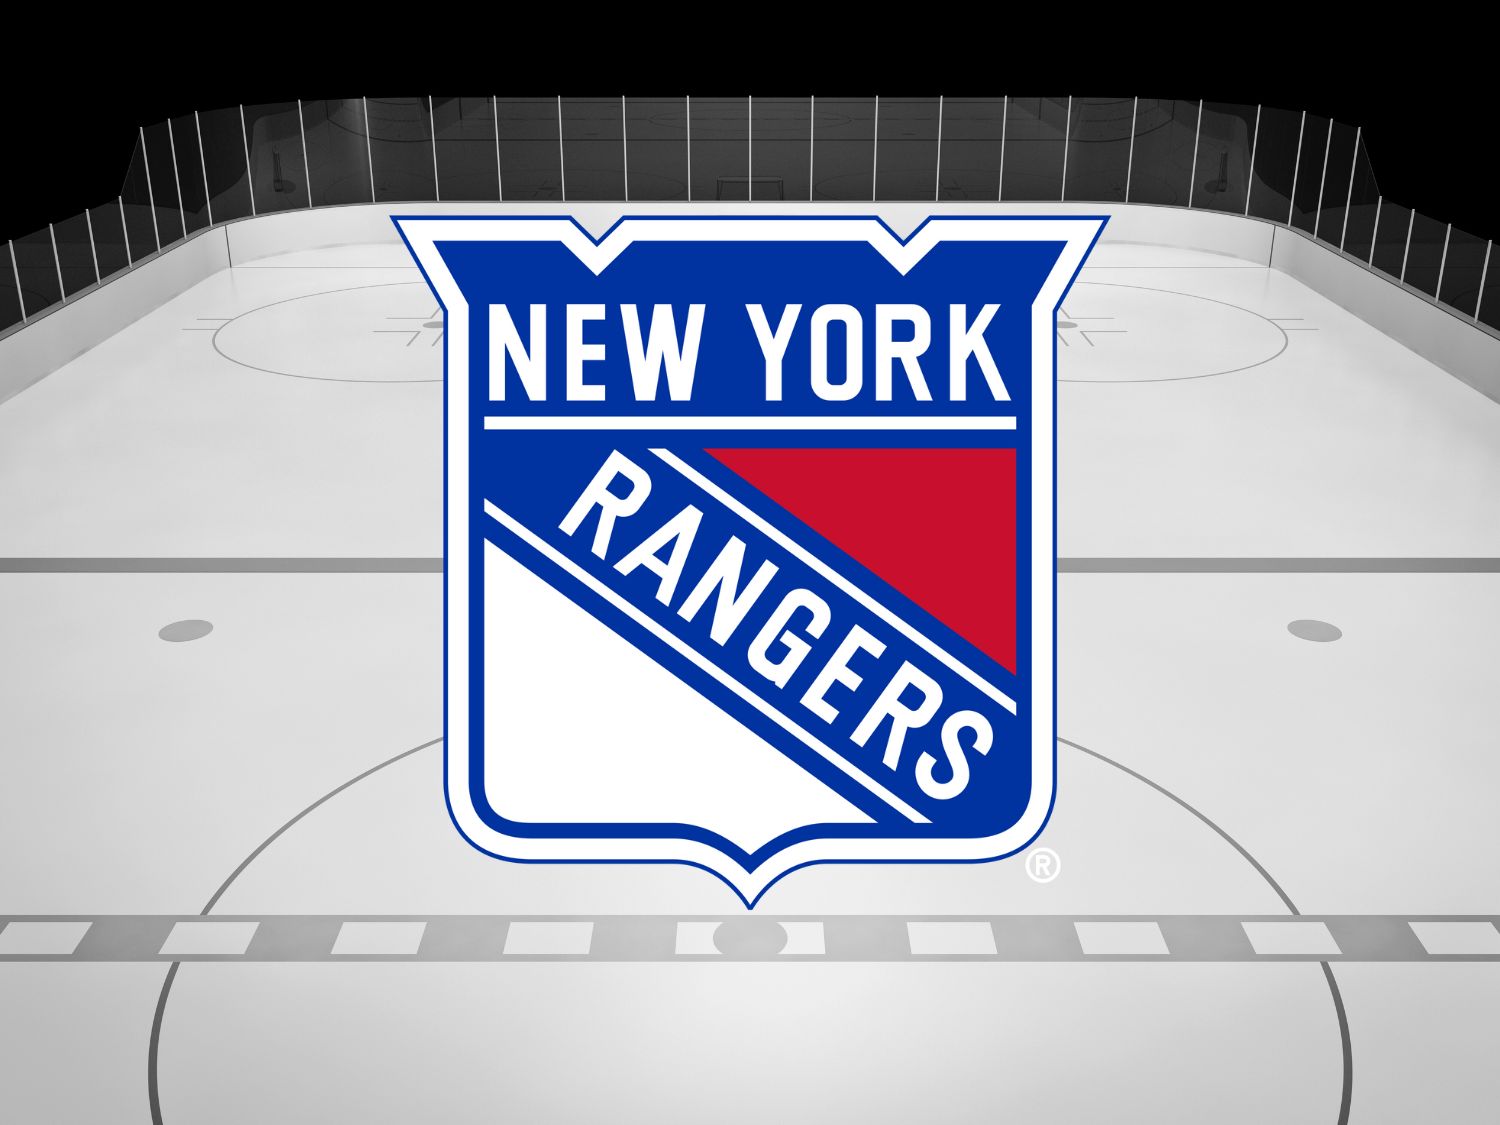 New York Rangers Tickets and Seats